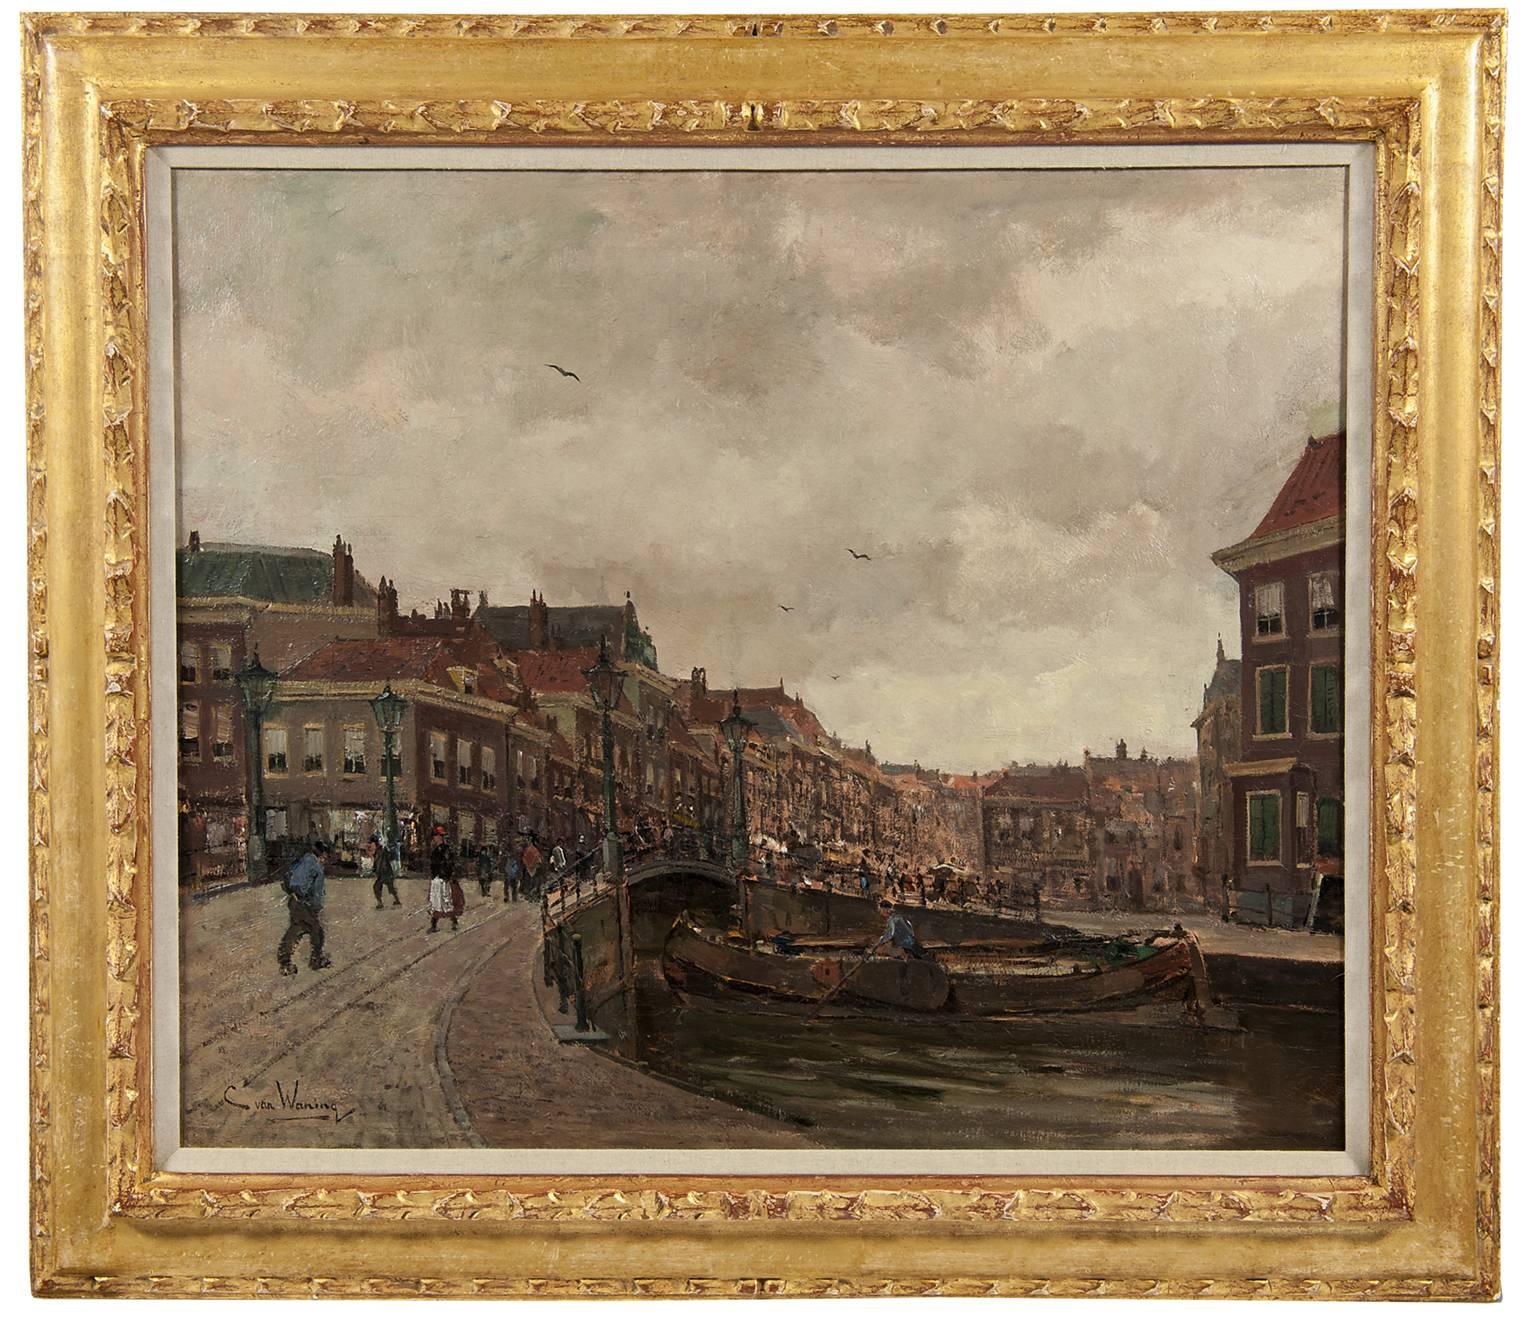 Kees van Waning Landscape Painting - A view of the Wagenbrug and the Wagenstraat in The Hague